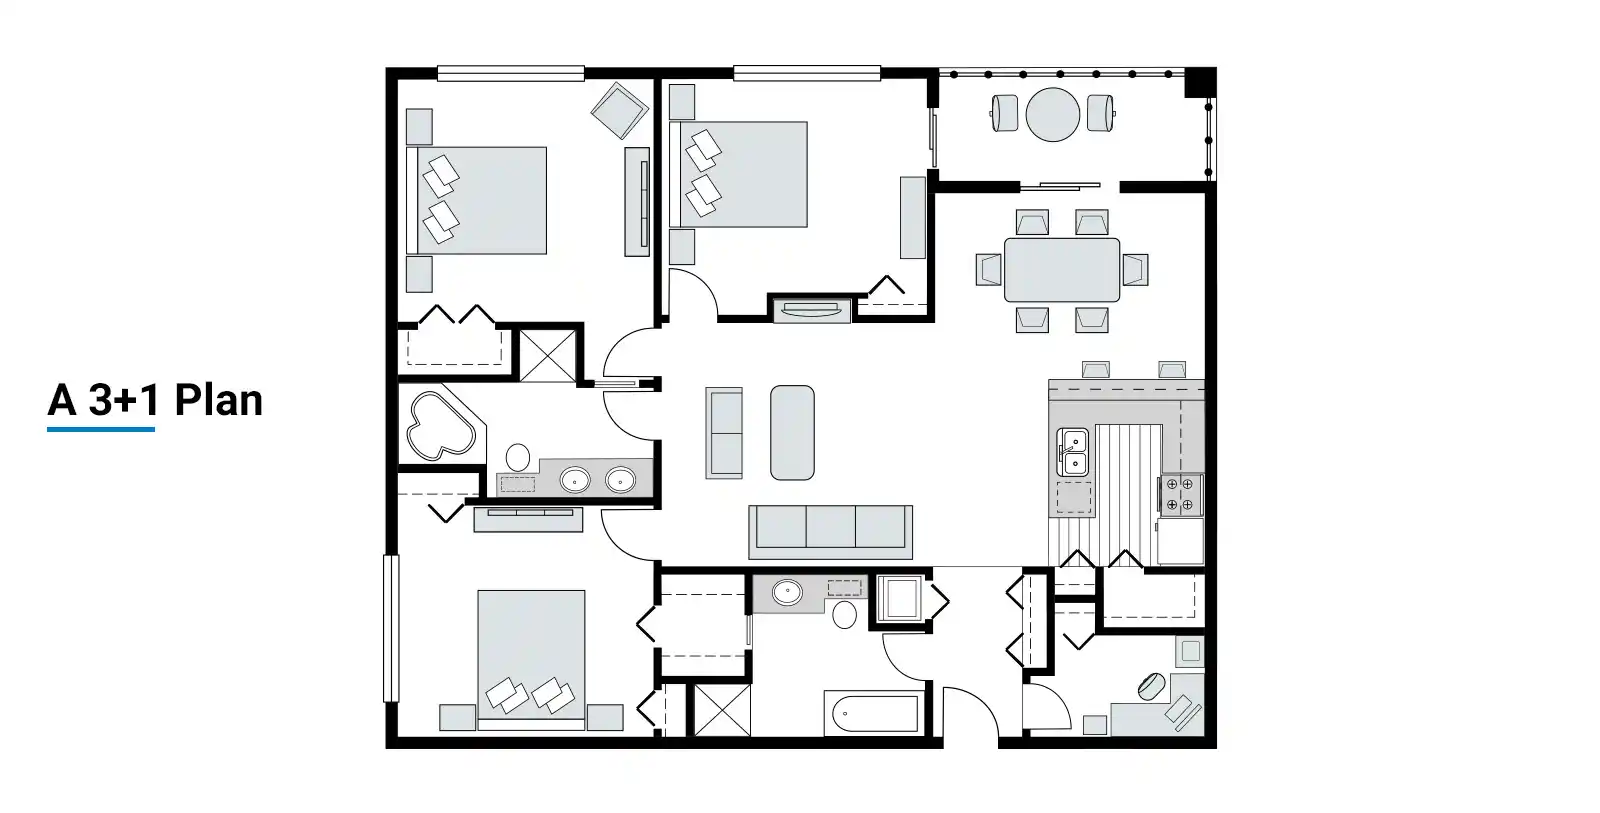 What is 3+1 apartment in turkey? A plan of 3+1 flat in Turkey with 3 bedrooms and 1 hall.